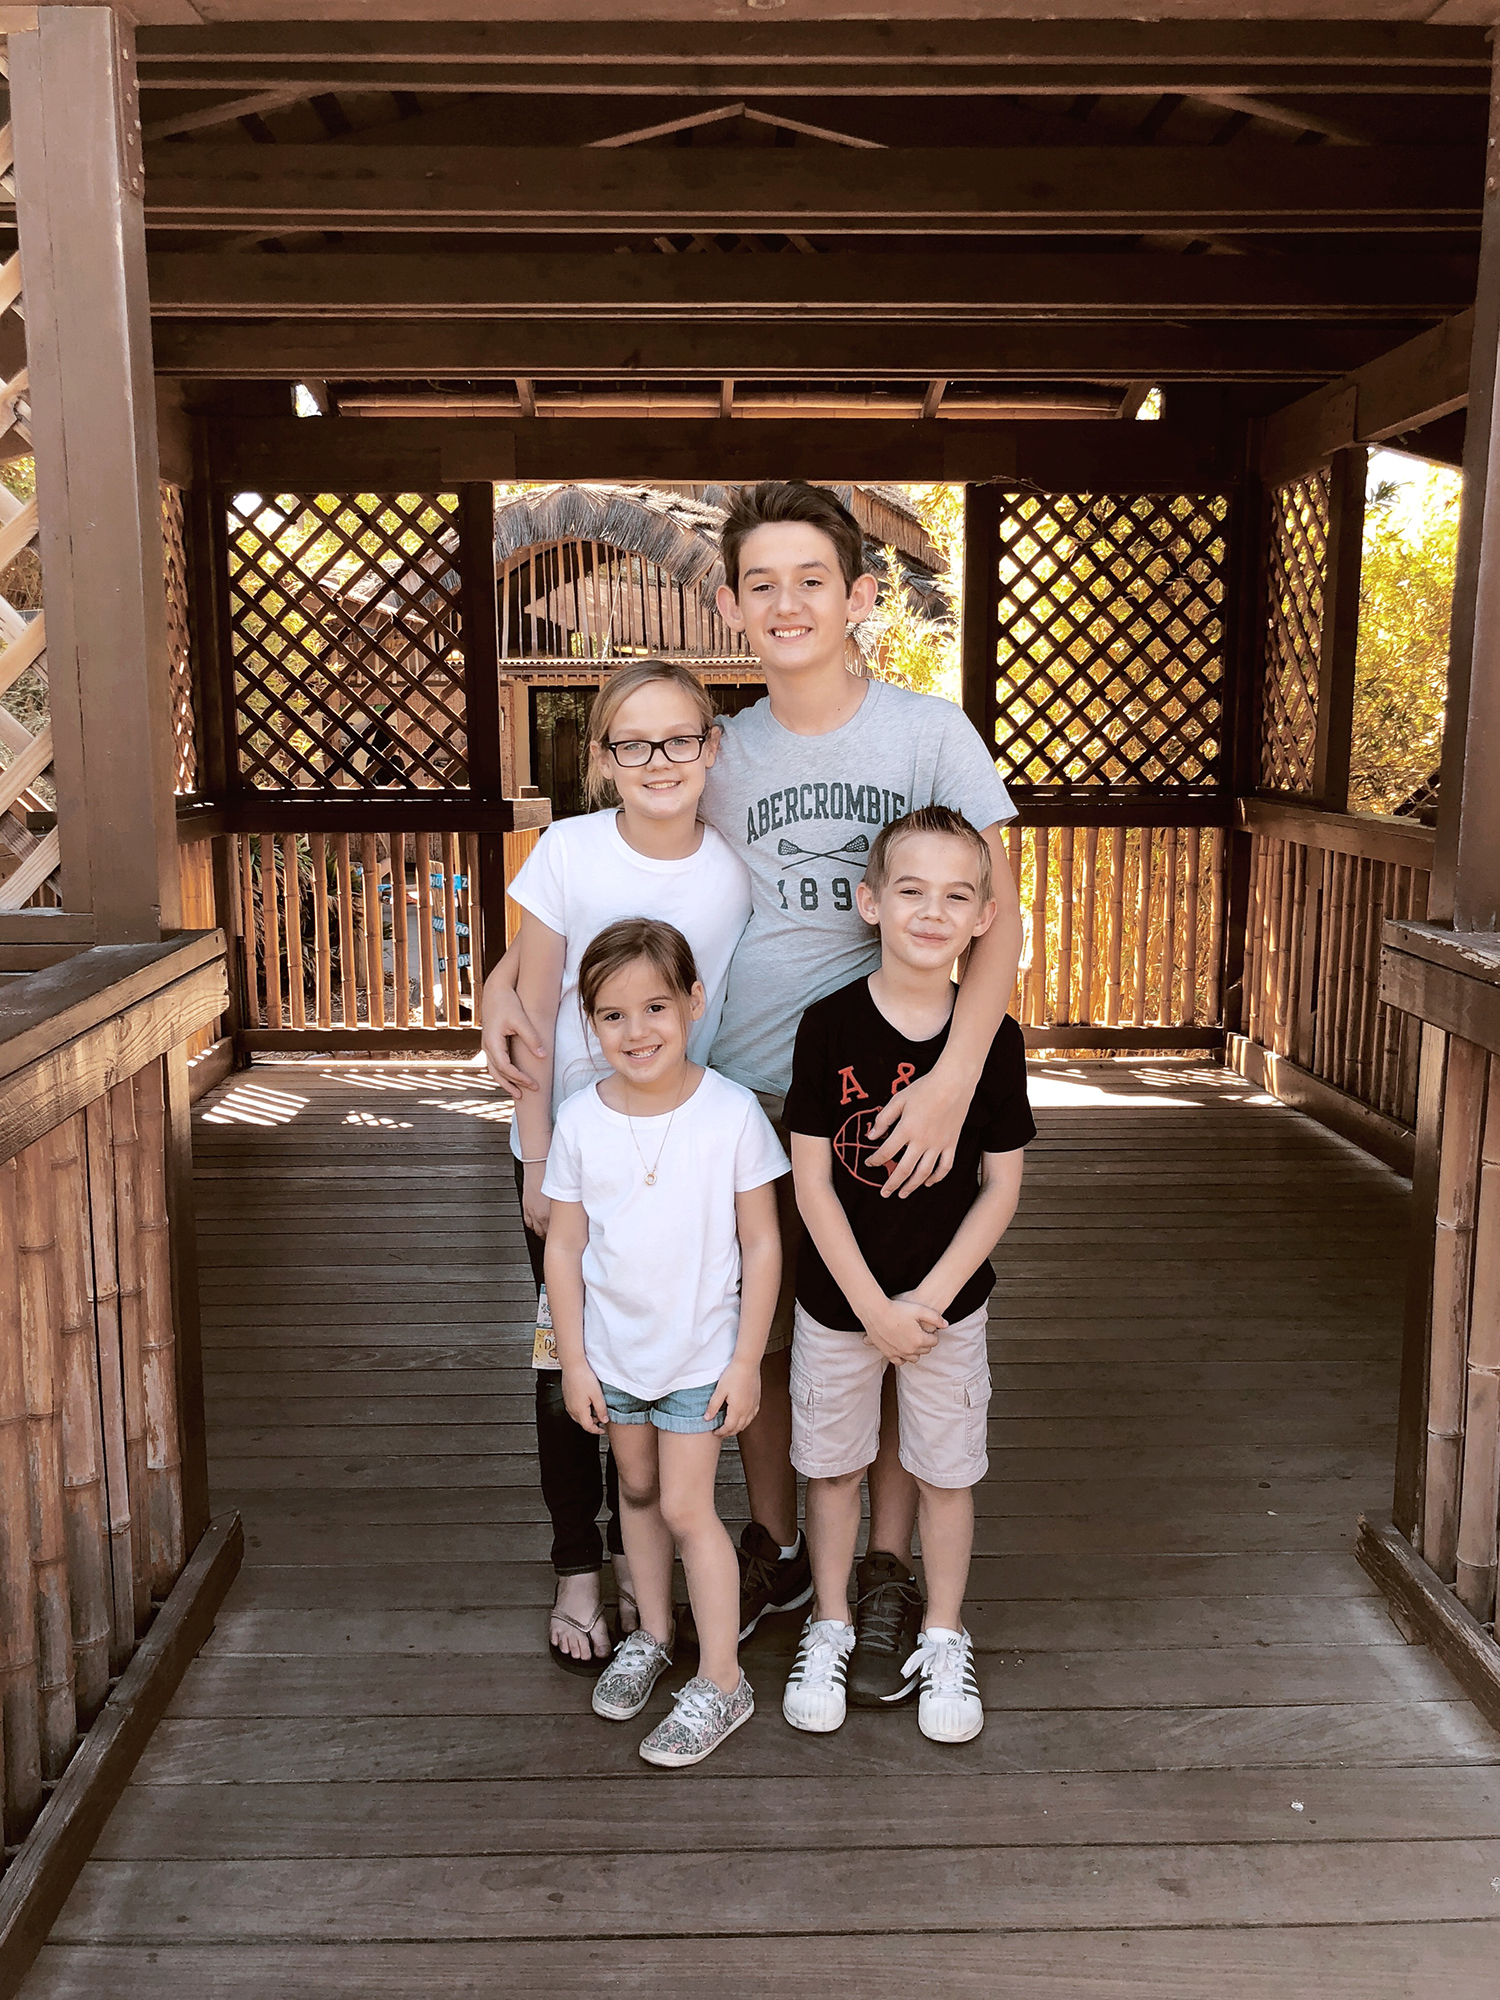 A day at the Phoenix Zoo with the fam. The perfect weekend weather here in the valley and just in time to enjoy this kind of outing before the temperatures rise. Catch a peek into our time over on Haus of Layne! #Zoo #Phoenix #Arizona #FamilyActivityIdeas #WeekendVibe #MomBlogger